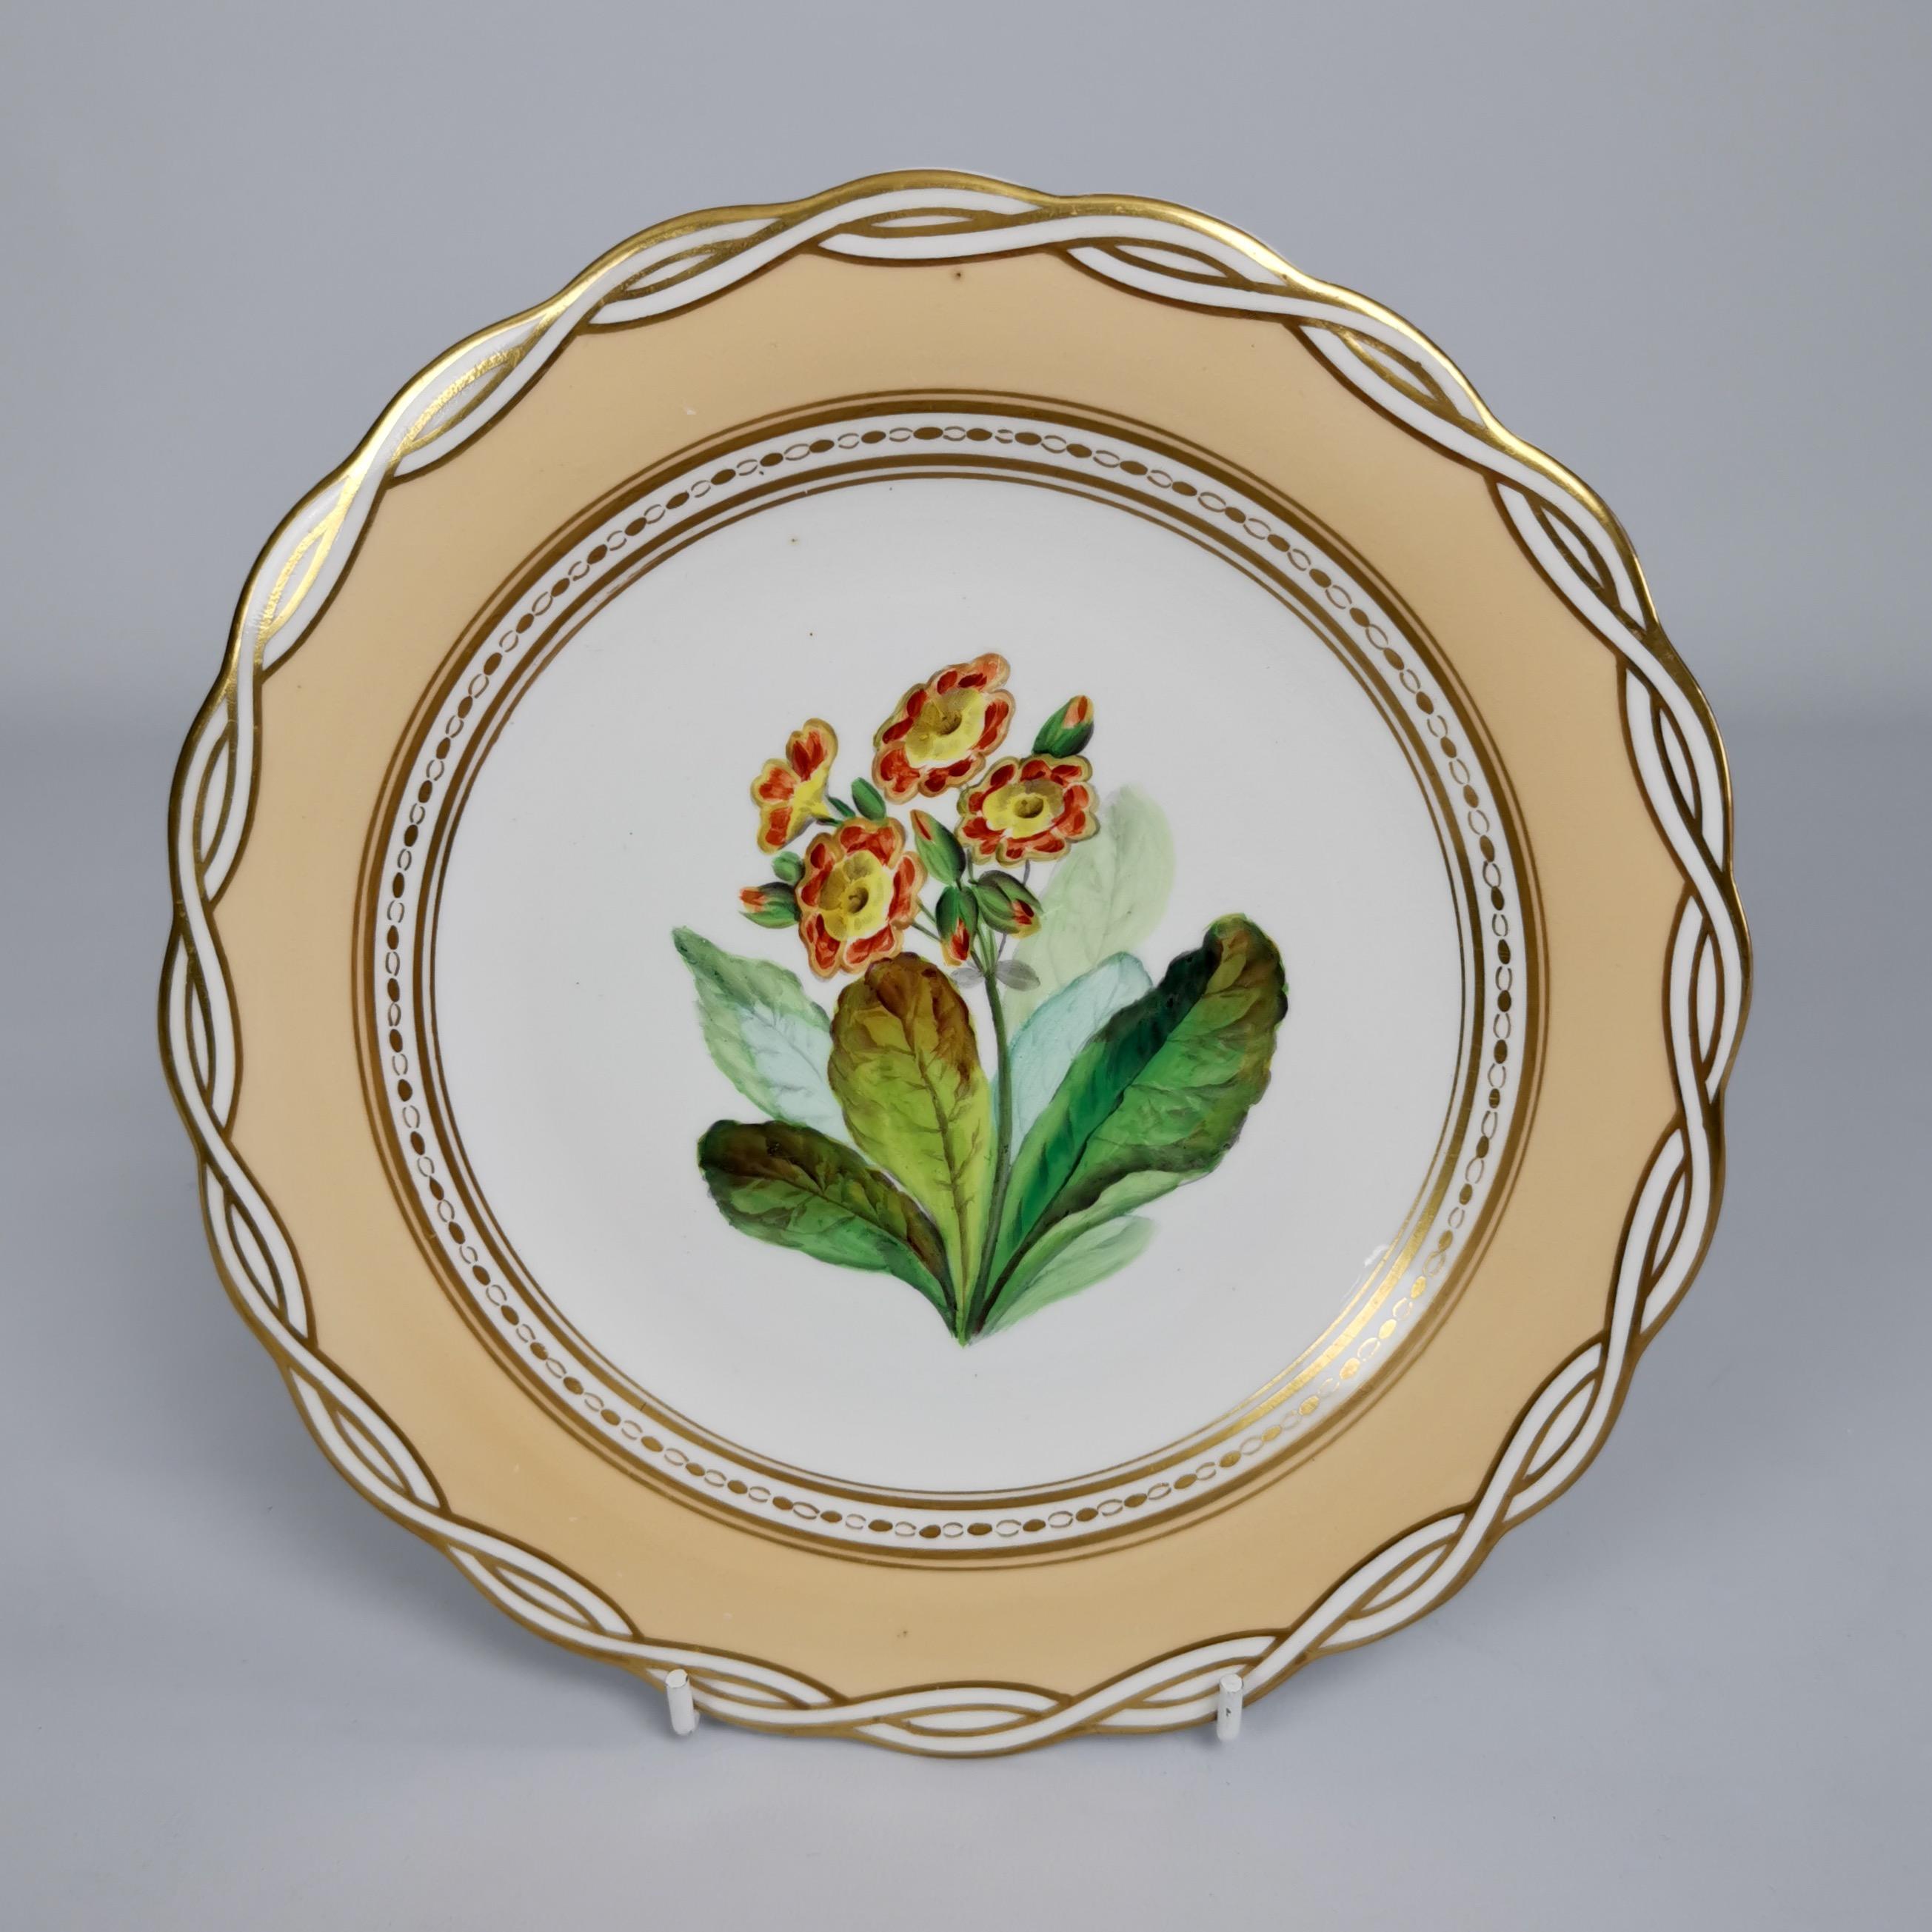 Victorian Minton Pair of Plates, Peach with Flowerse, Argyle Style, ca 1850